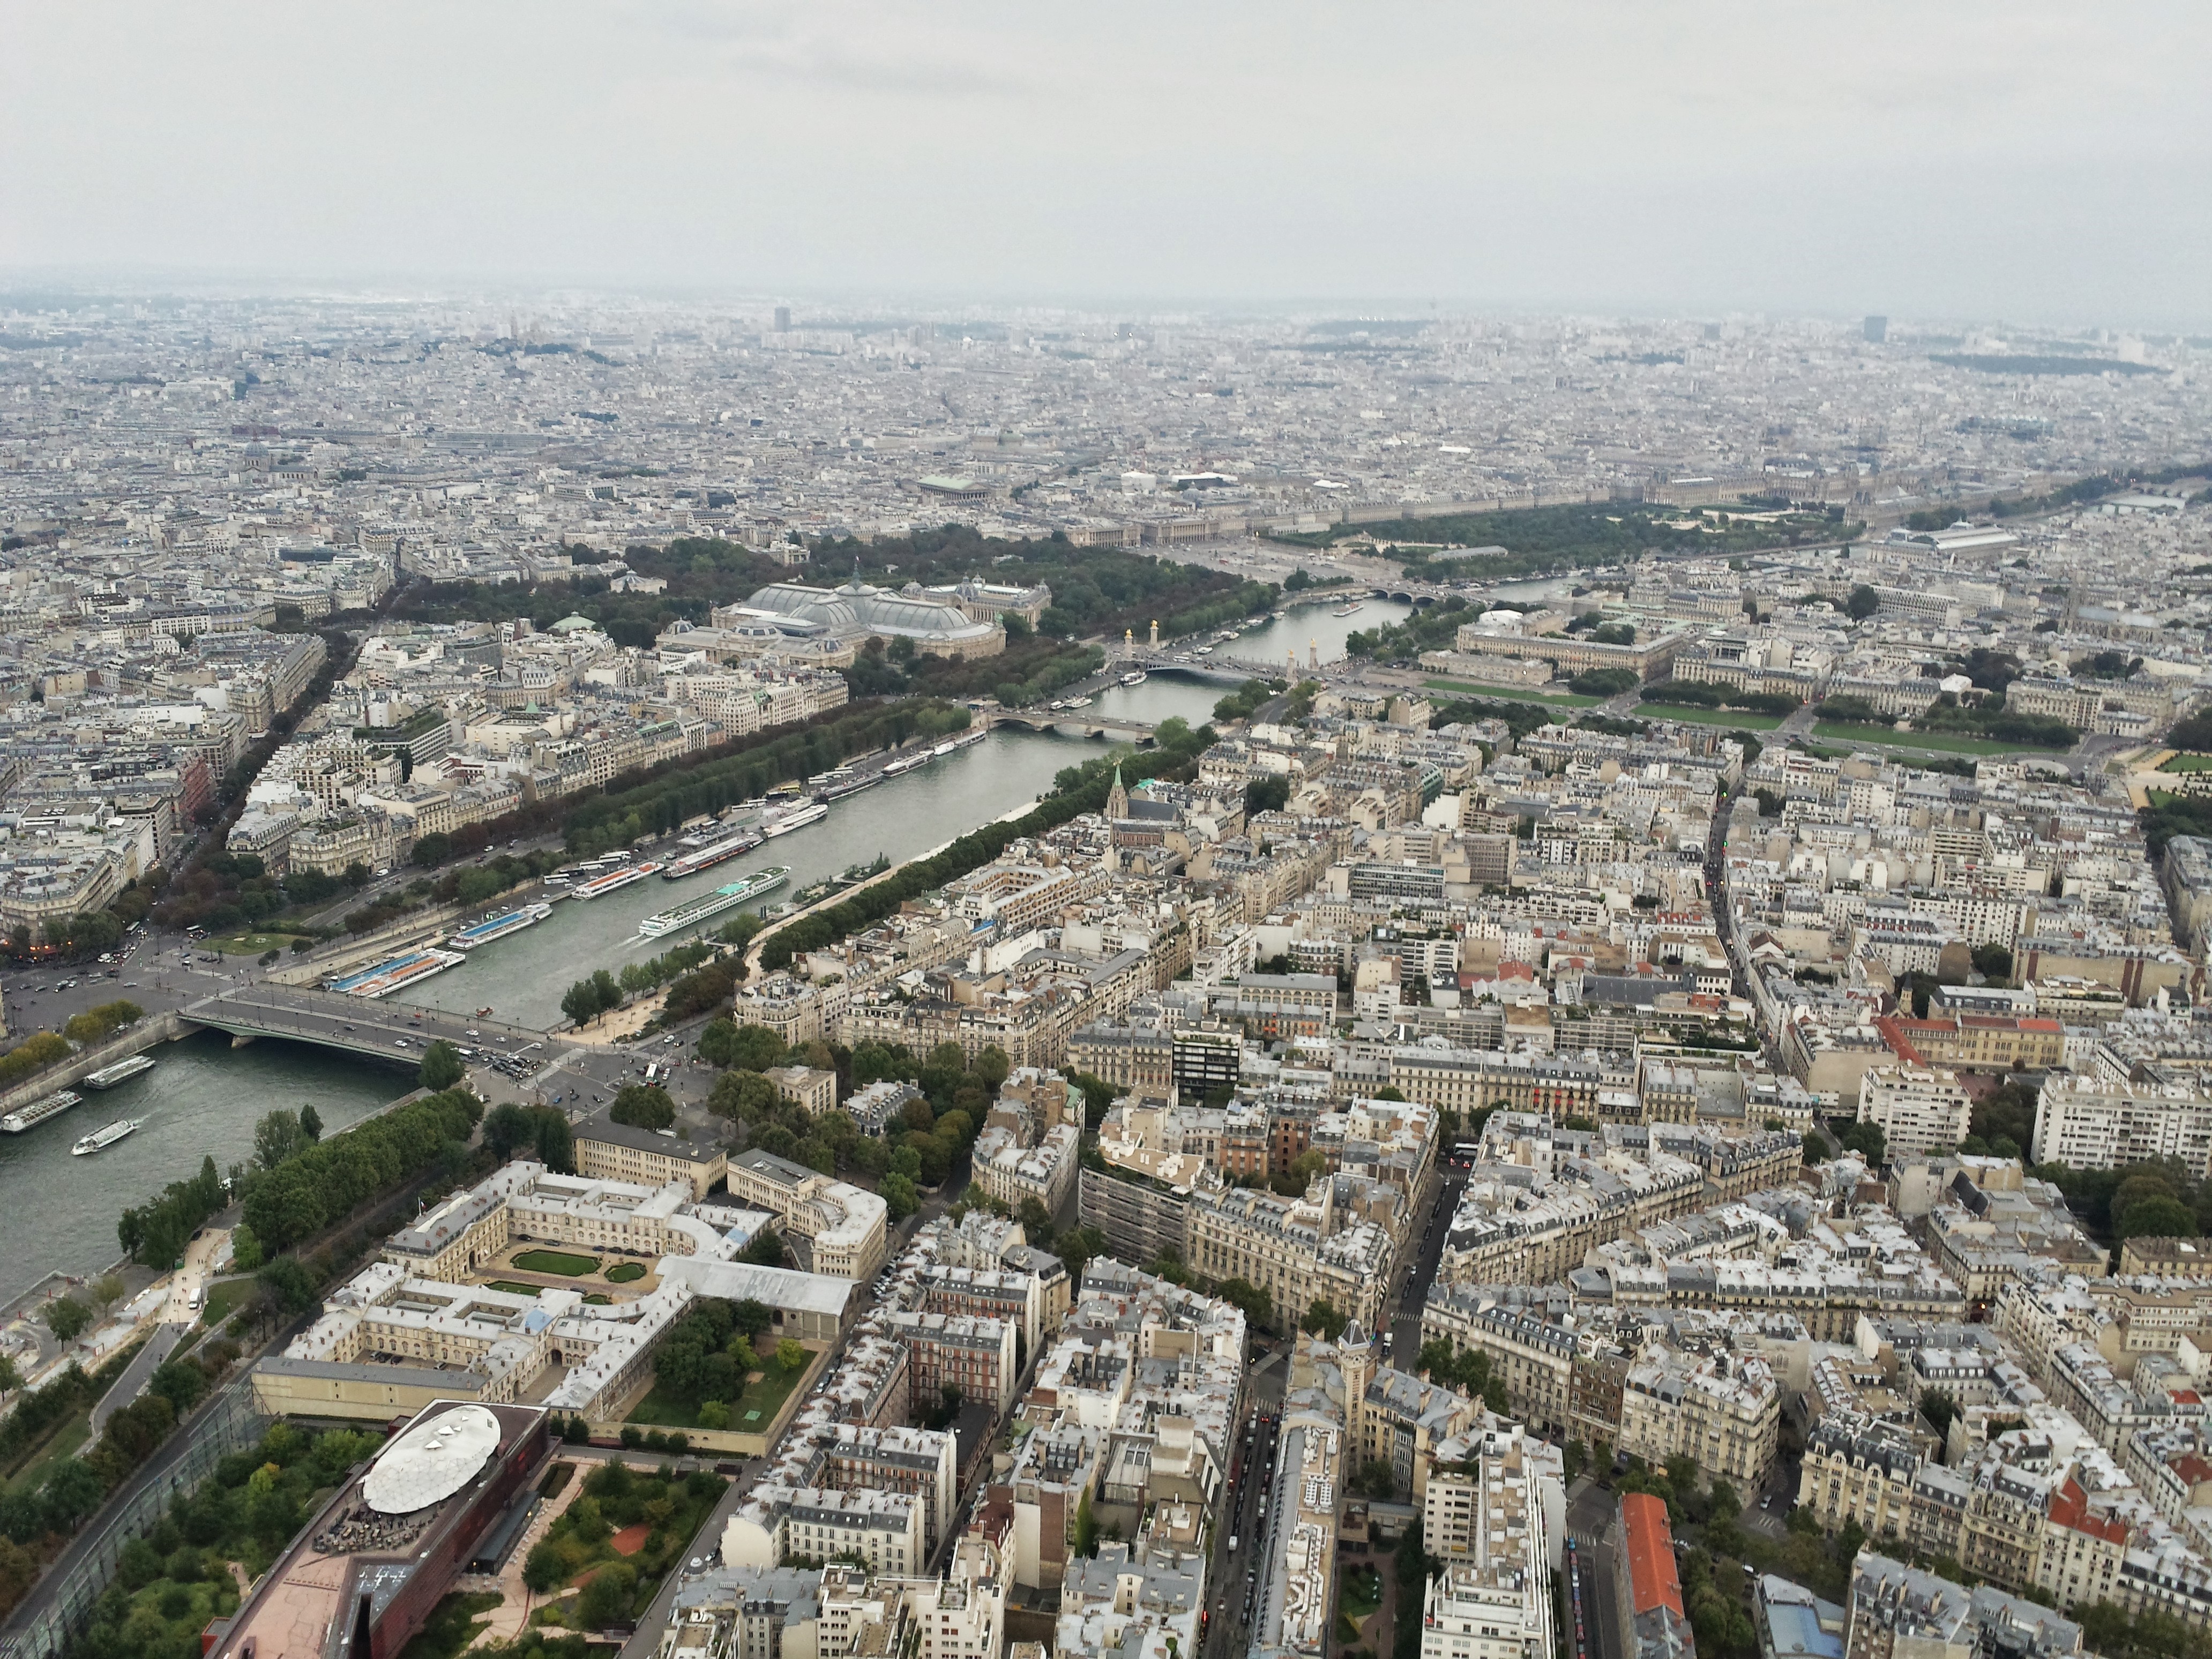 Paris from the top of the Eiffel Tower